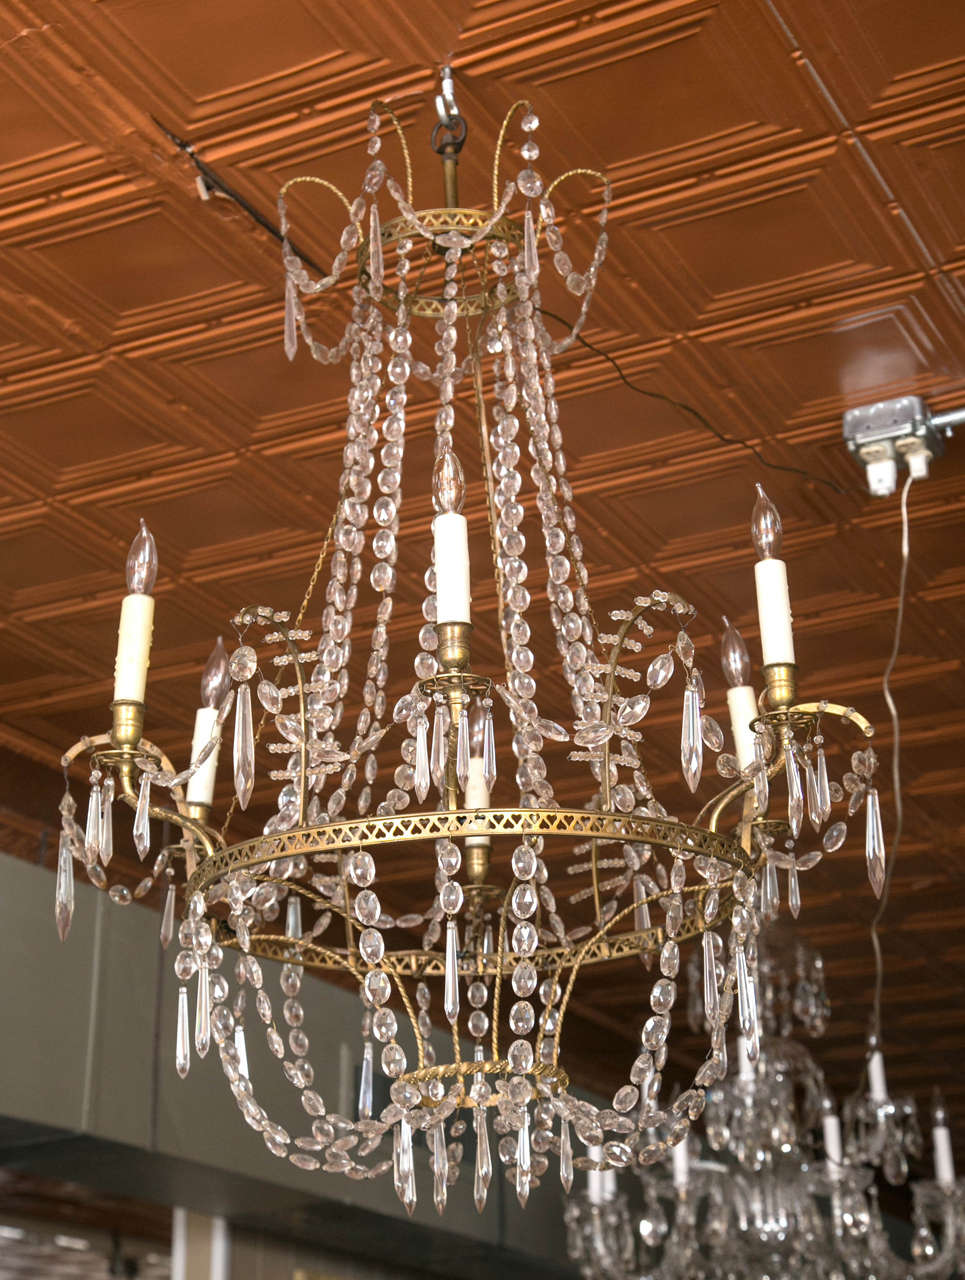 The bronze on this Baltic chandelier is very fine quality. This is an elegant chandelier from top to bottom with wonderful detail. Both rims are pierced with hearts. This six-light chandelier is a gem.